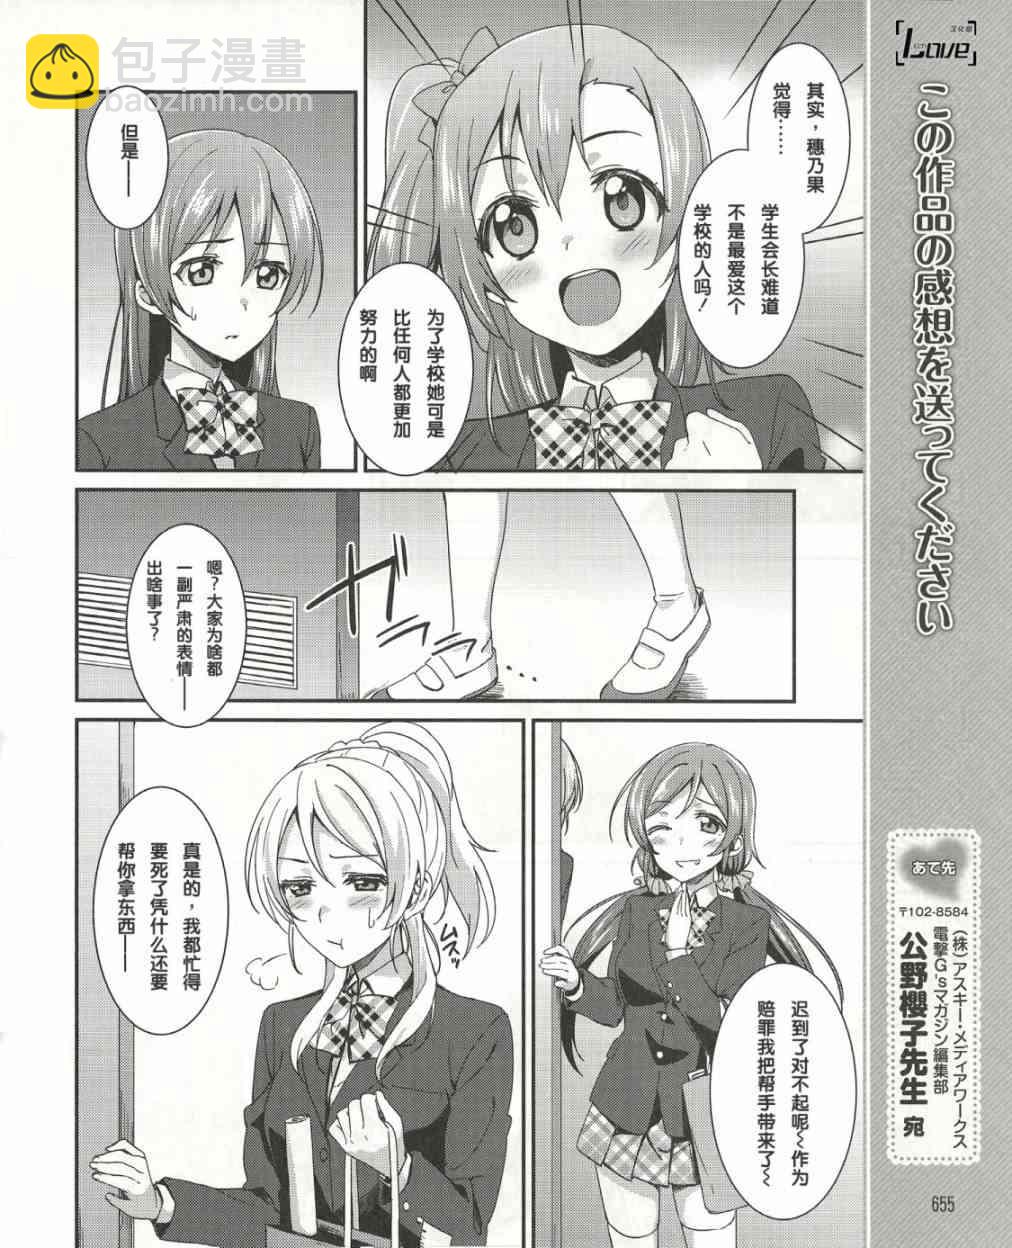 LoveLive - 15話 - 2